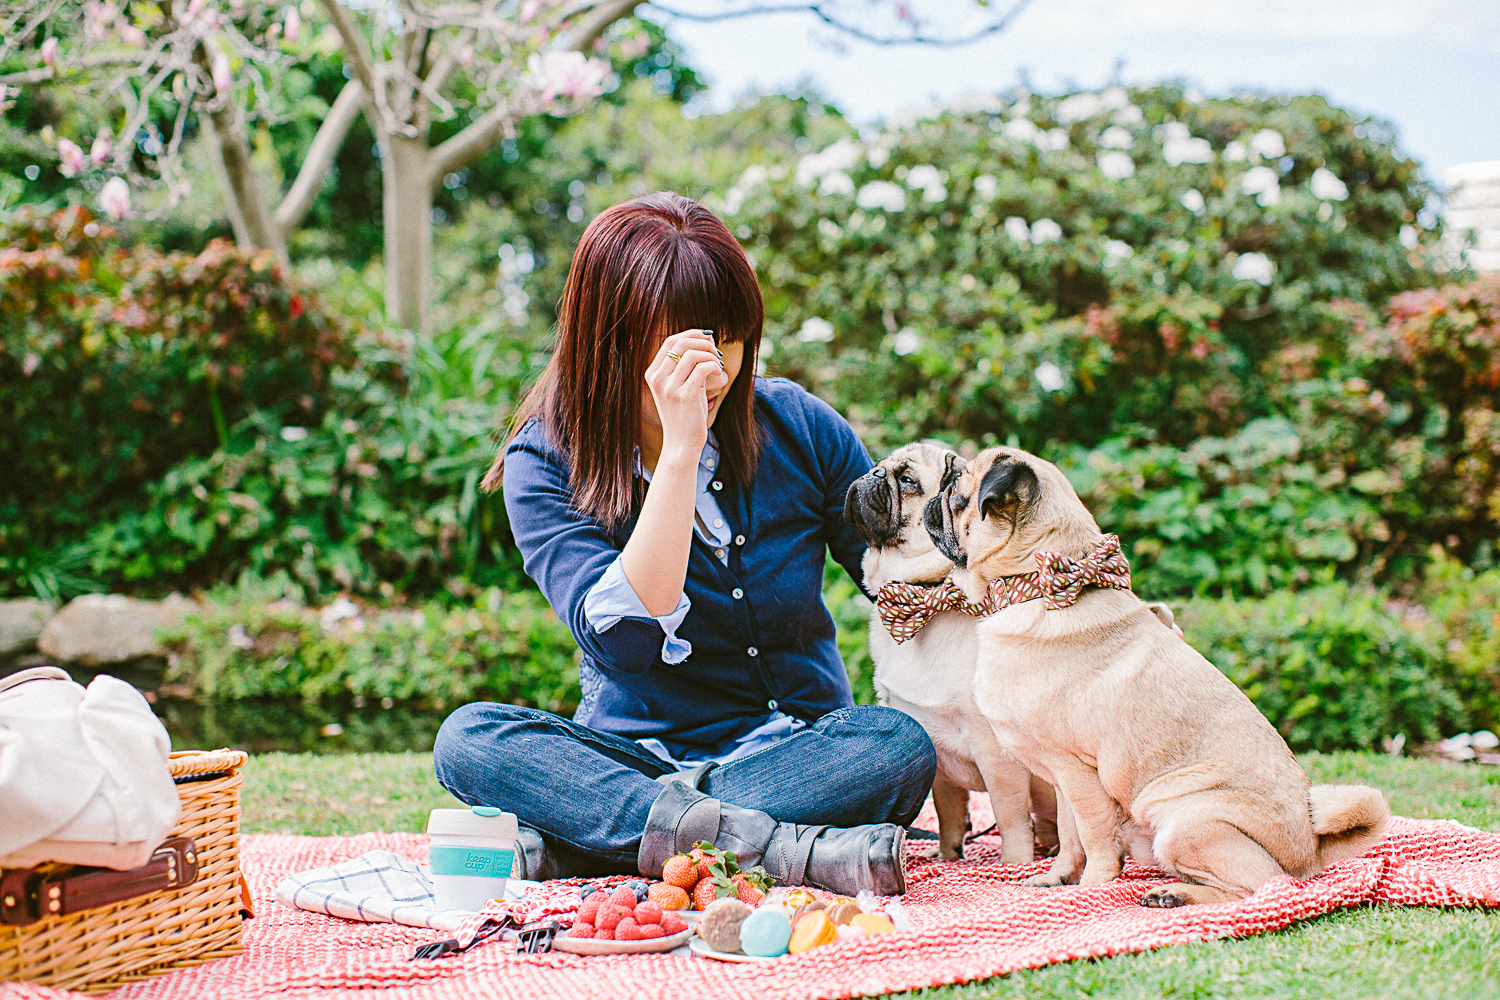 twoguineapigs_pet_photography_oh_jaffa_picnic_pugs_1500-15.jpg